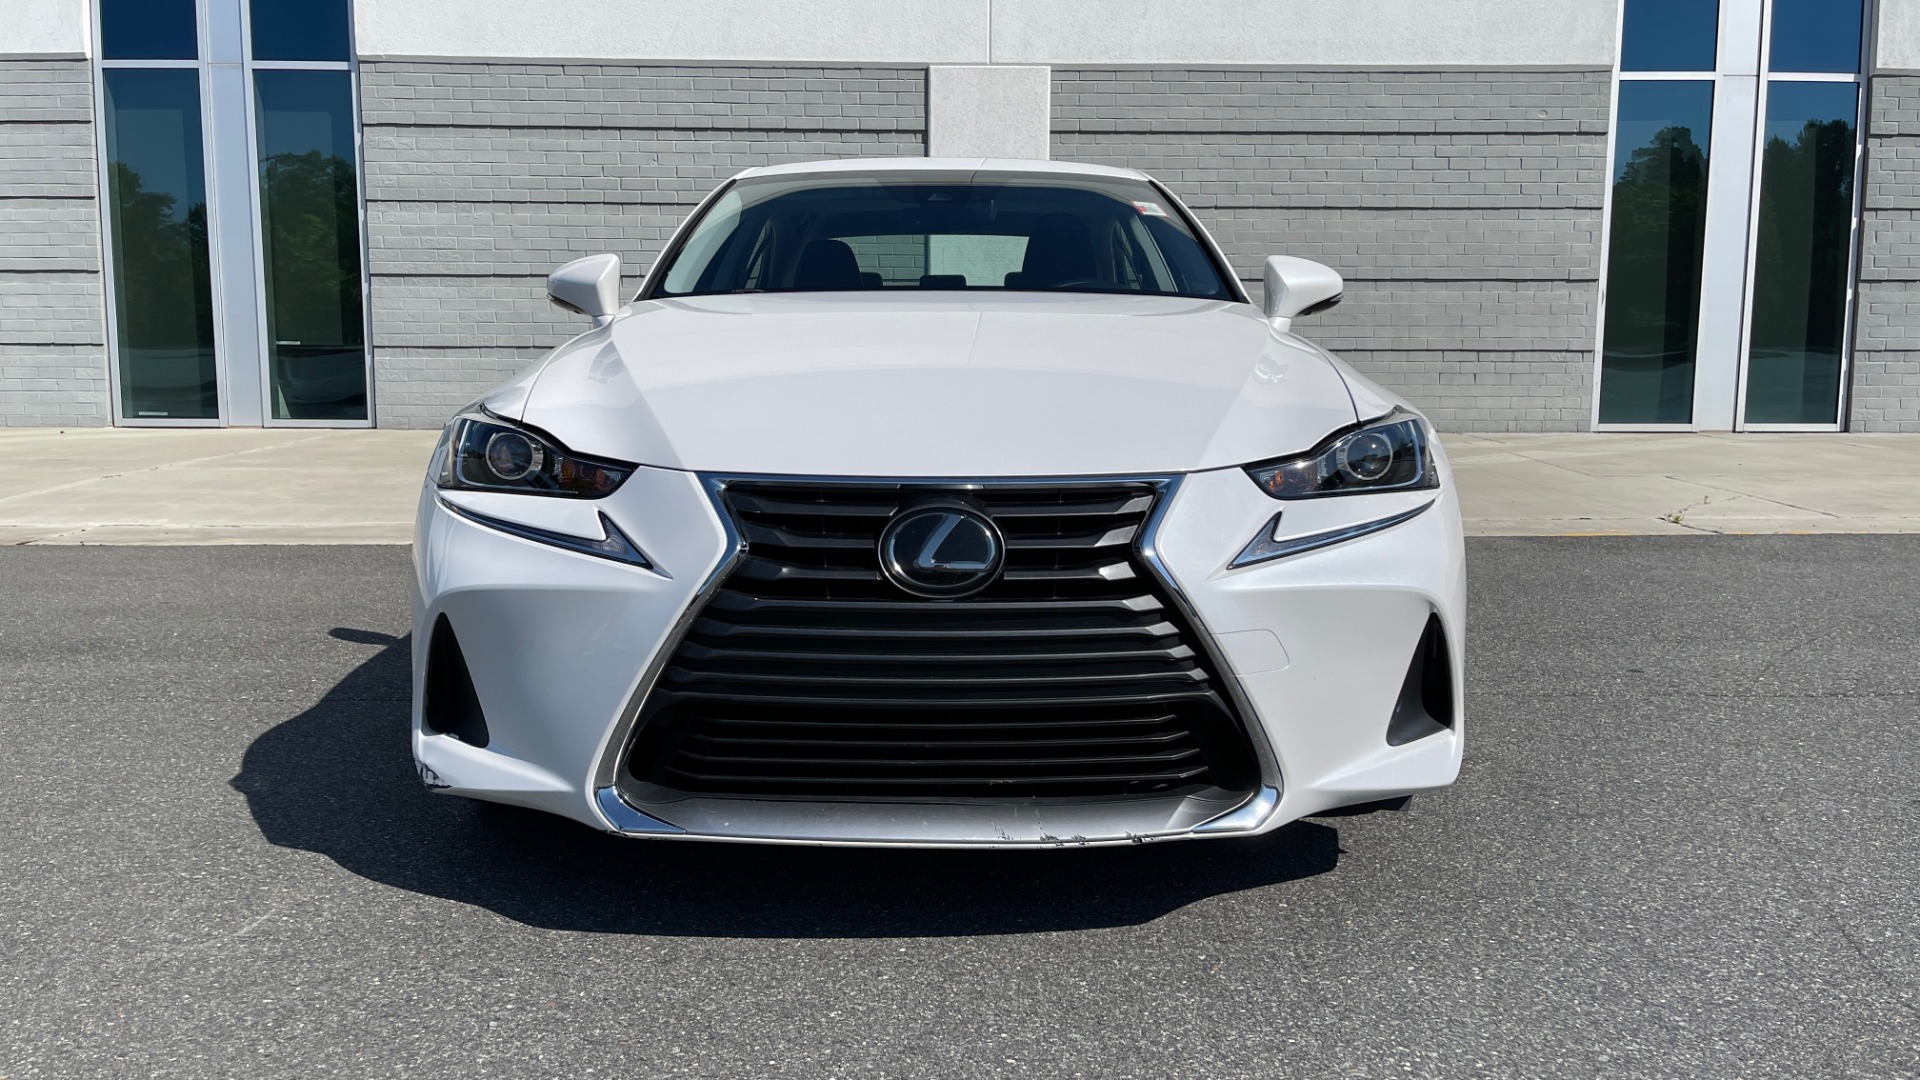 Used 2018 Lexus IS 300 / 2.0L TURBO / 8-SPD AUTO / SUNROOF / REARVIEW for sale Sold at Formula Imports in Charlotte NC 28227 13